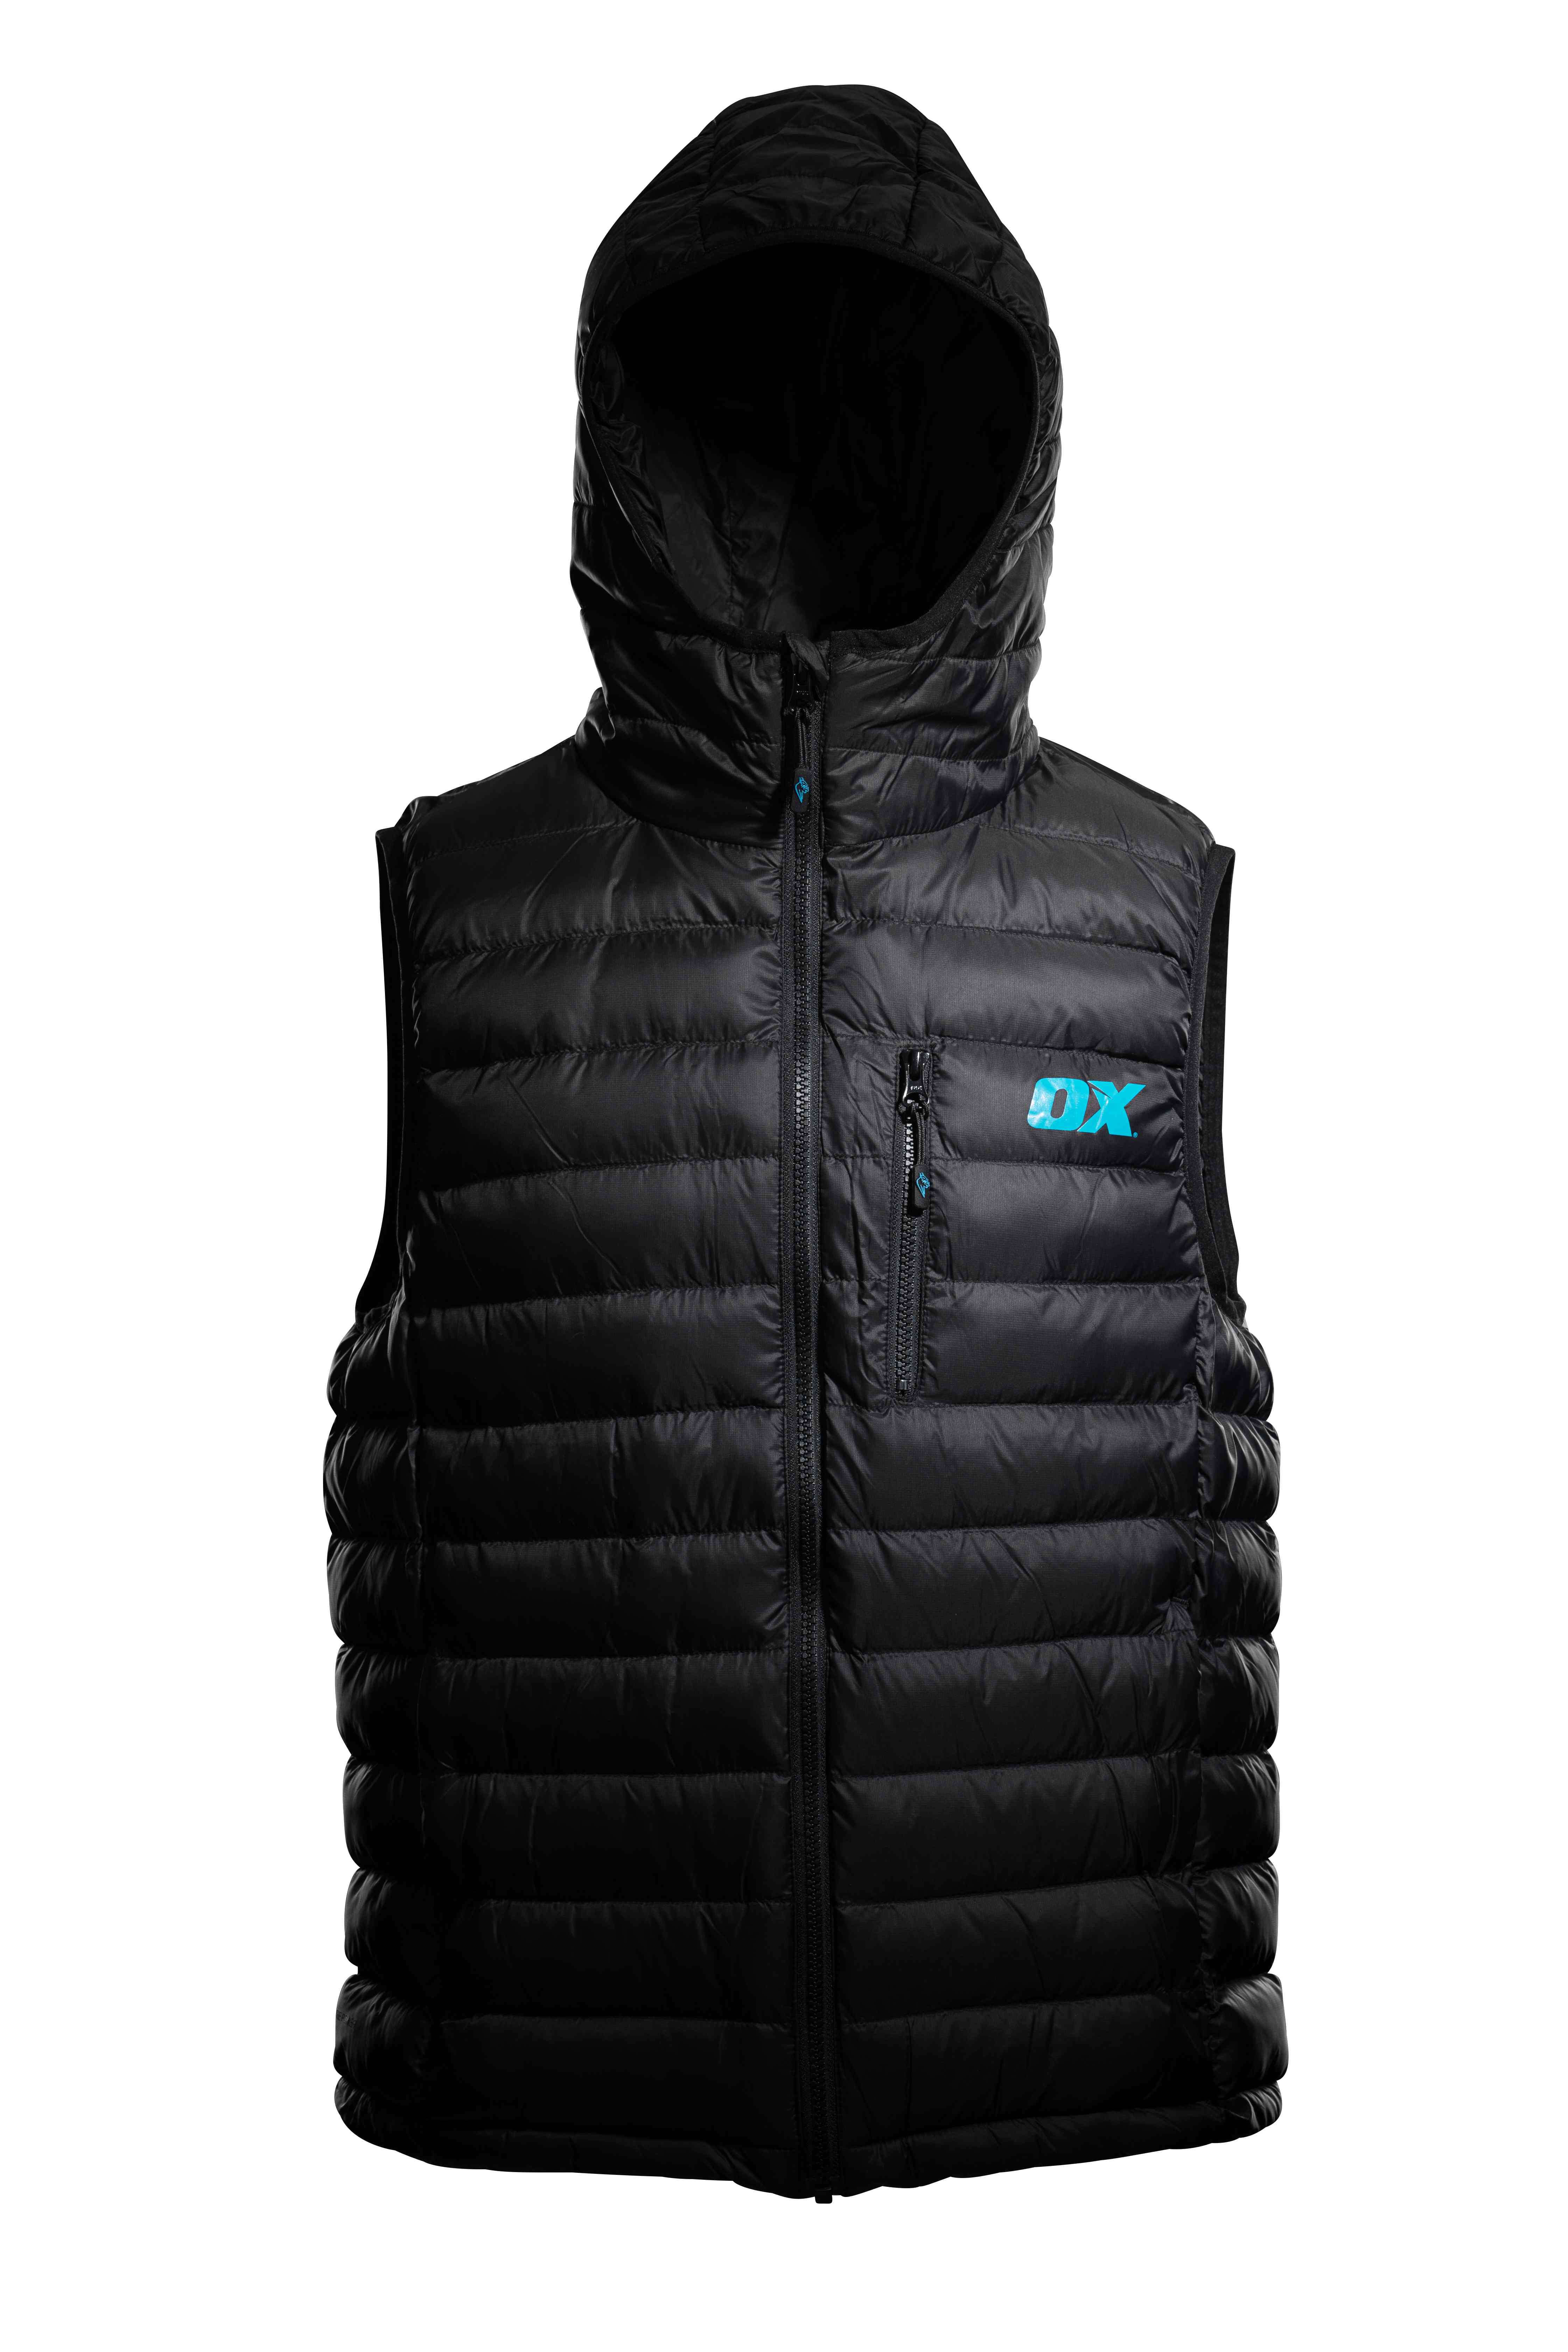 OX Ribbed Padded Gilet - S